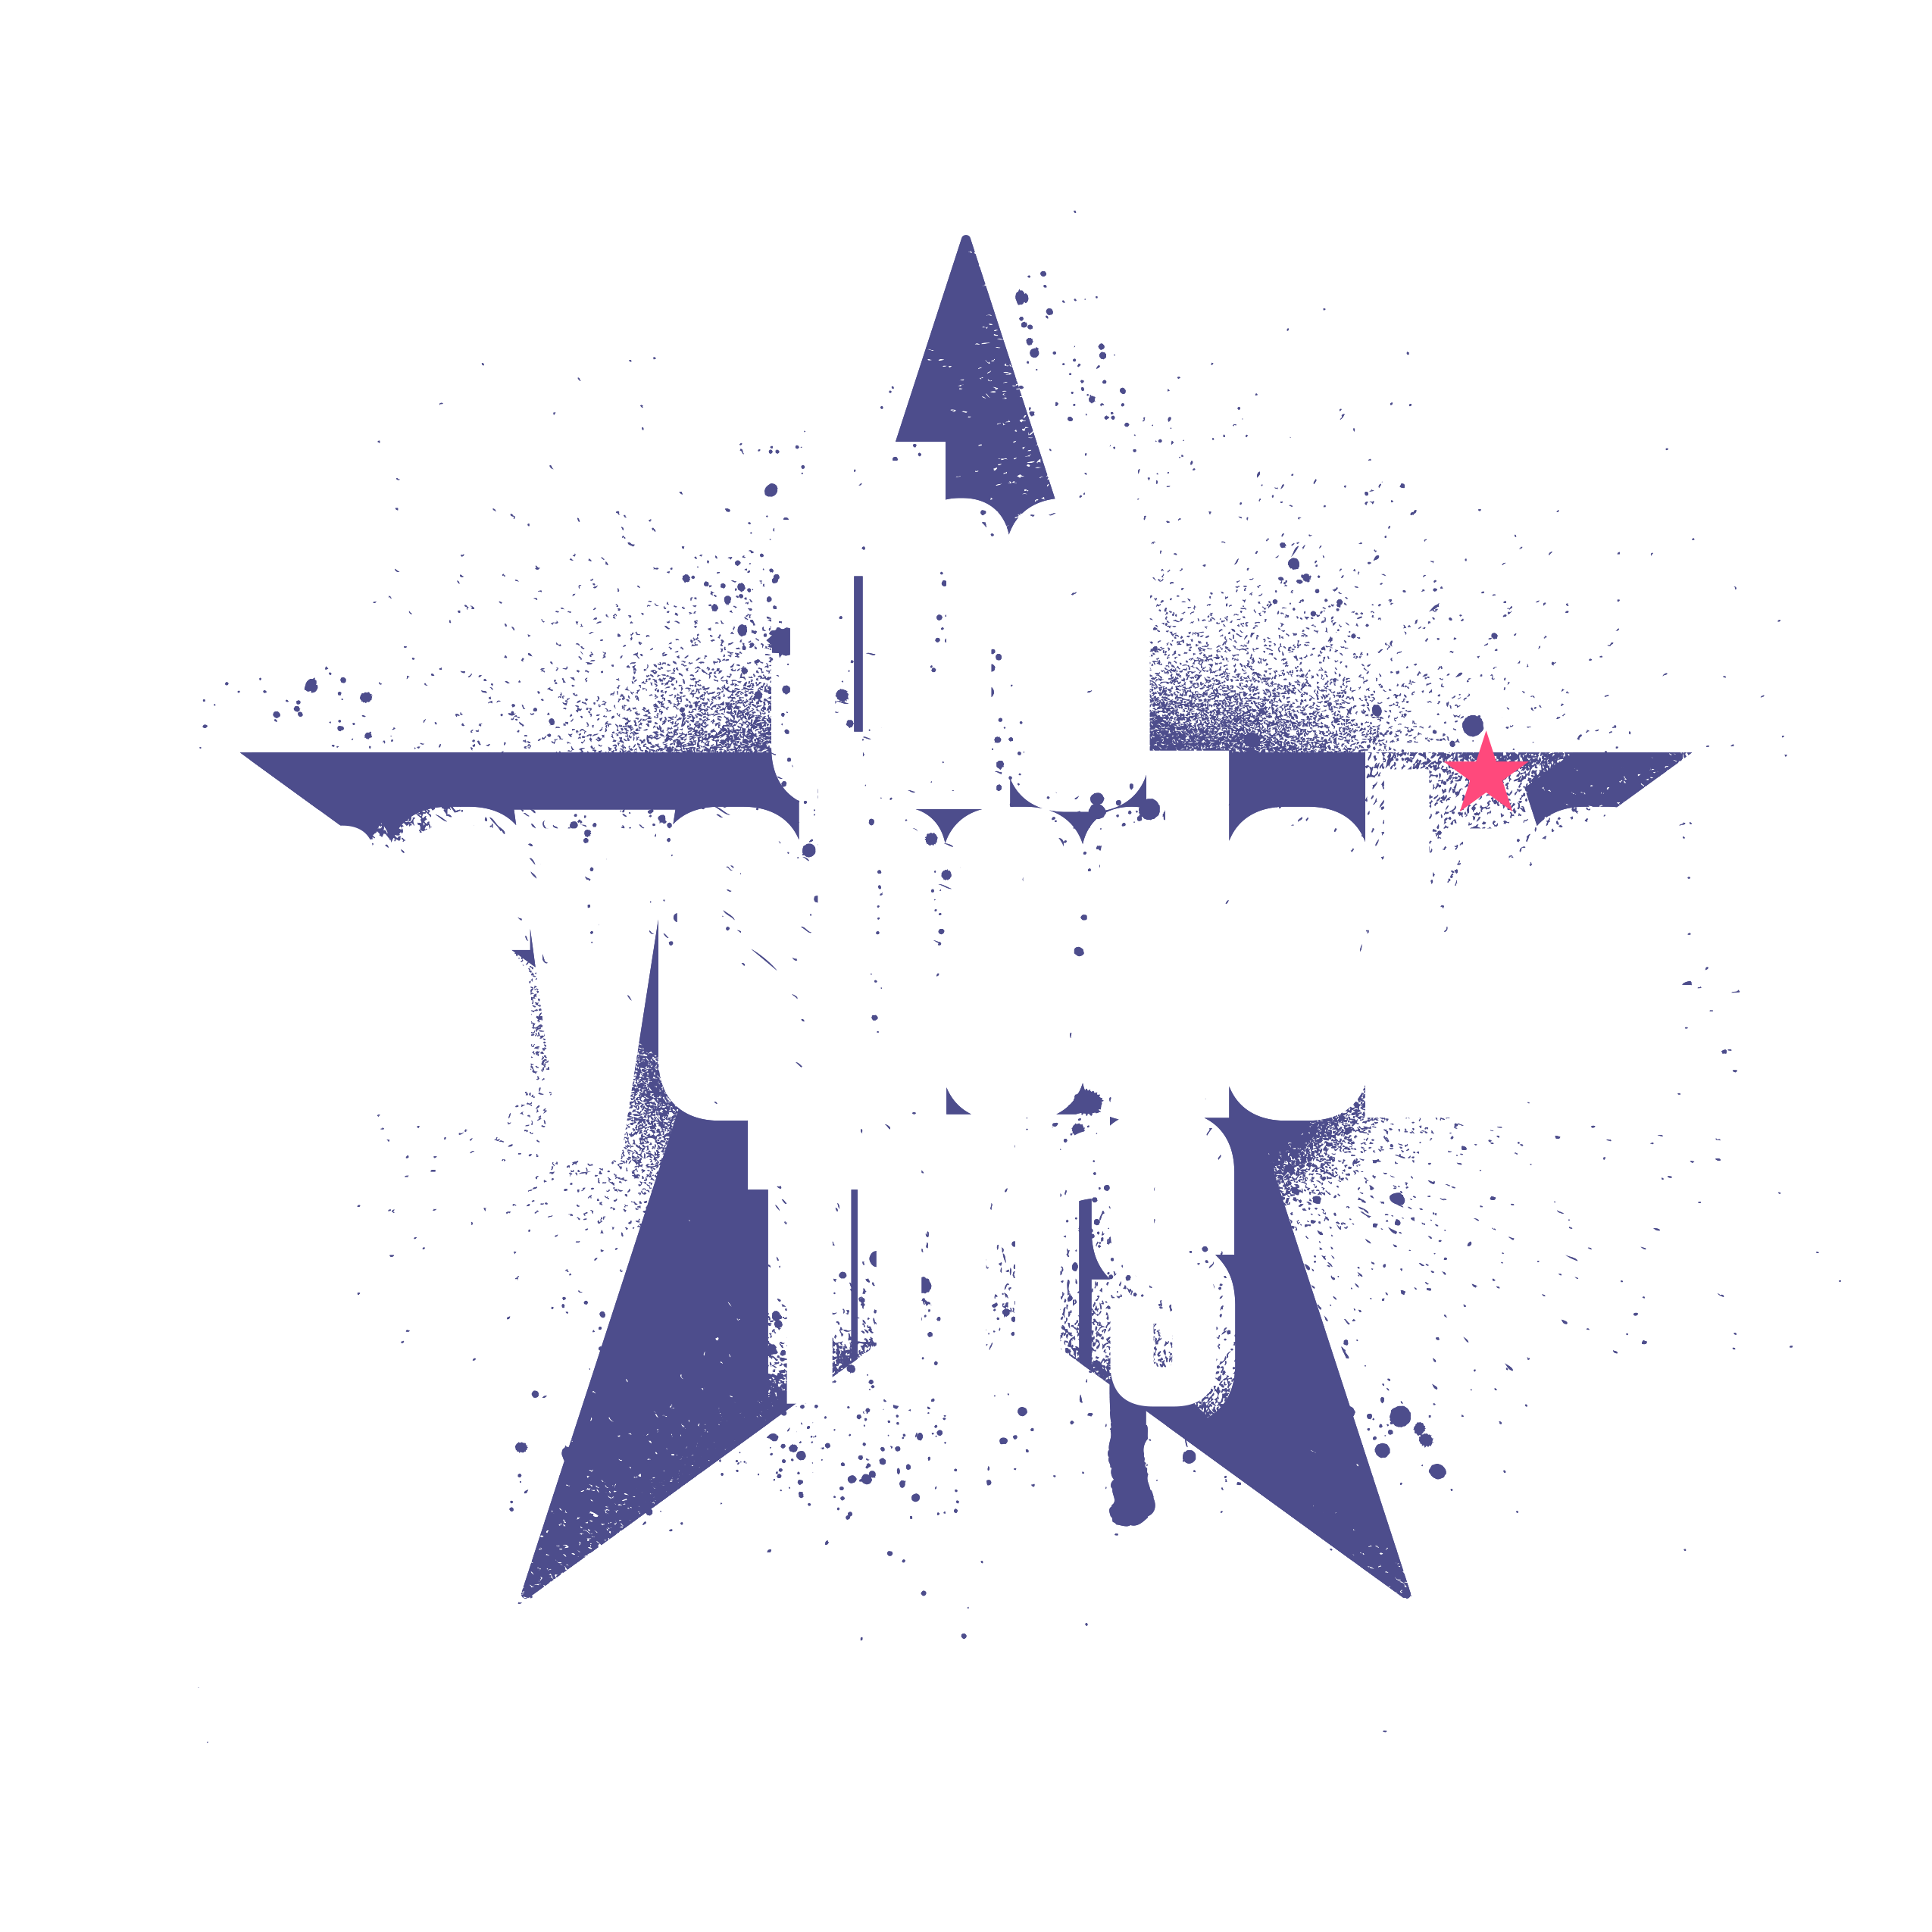 psychedelic furs uk tour 2022